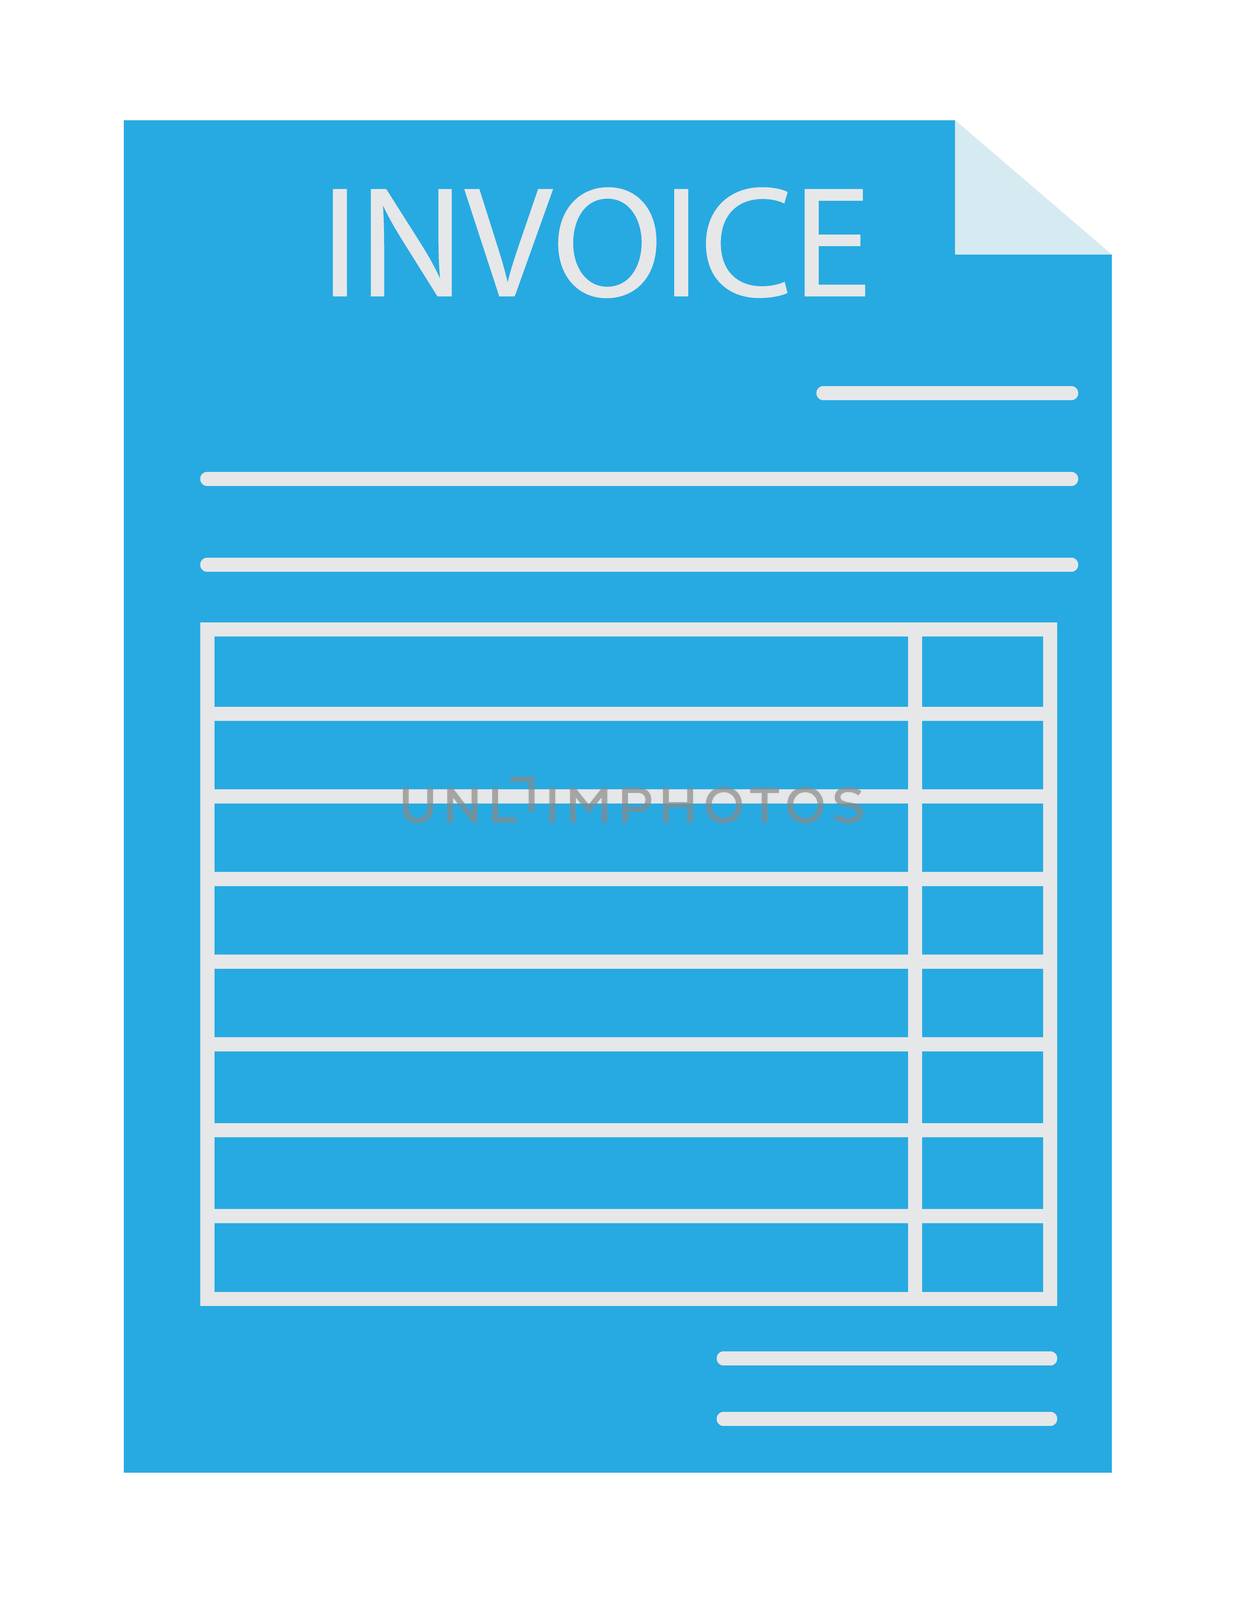 invoice icon on white background. invoice sign. flat style desig by suthee